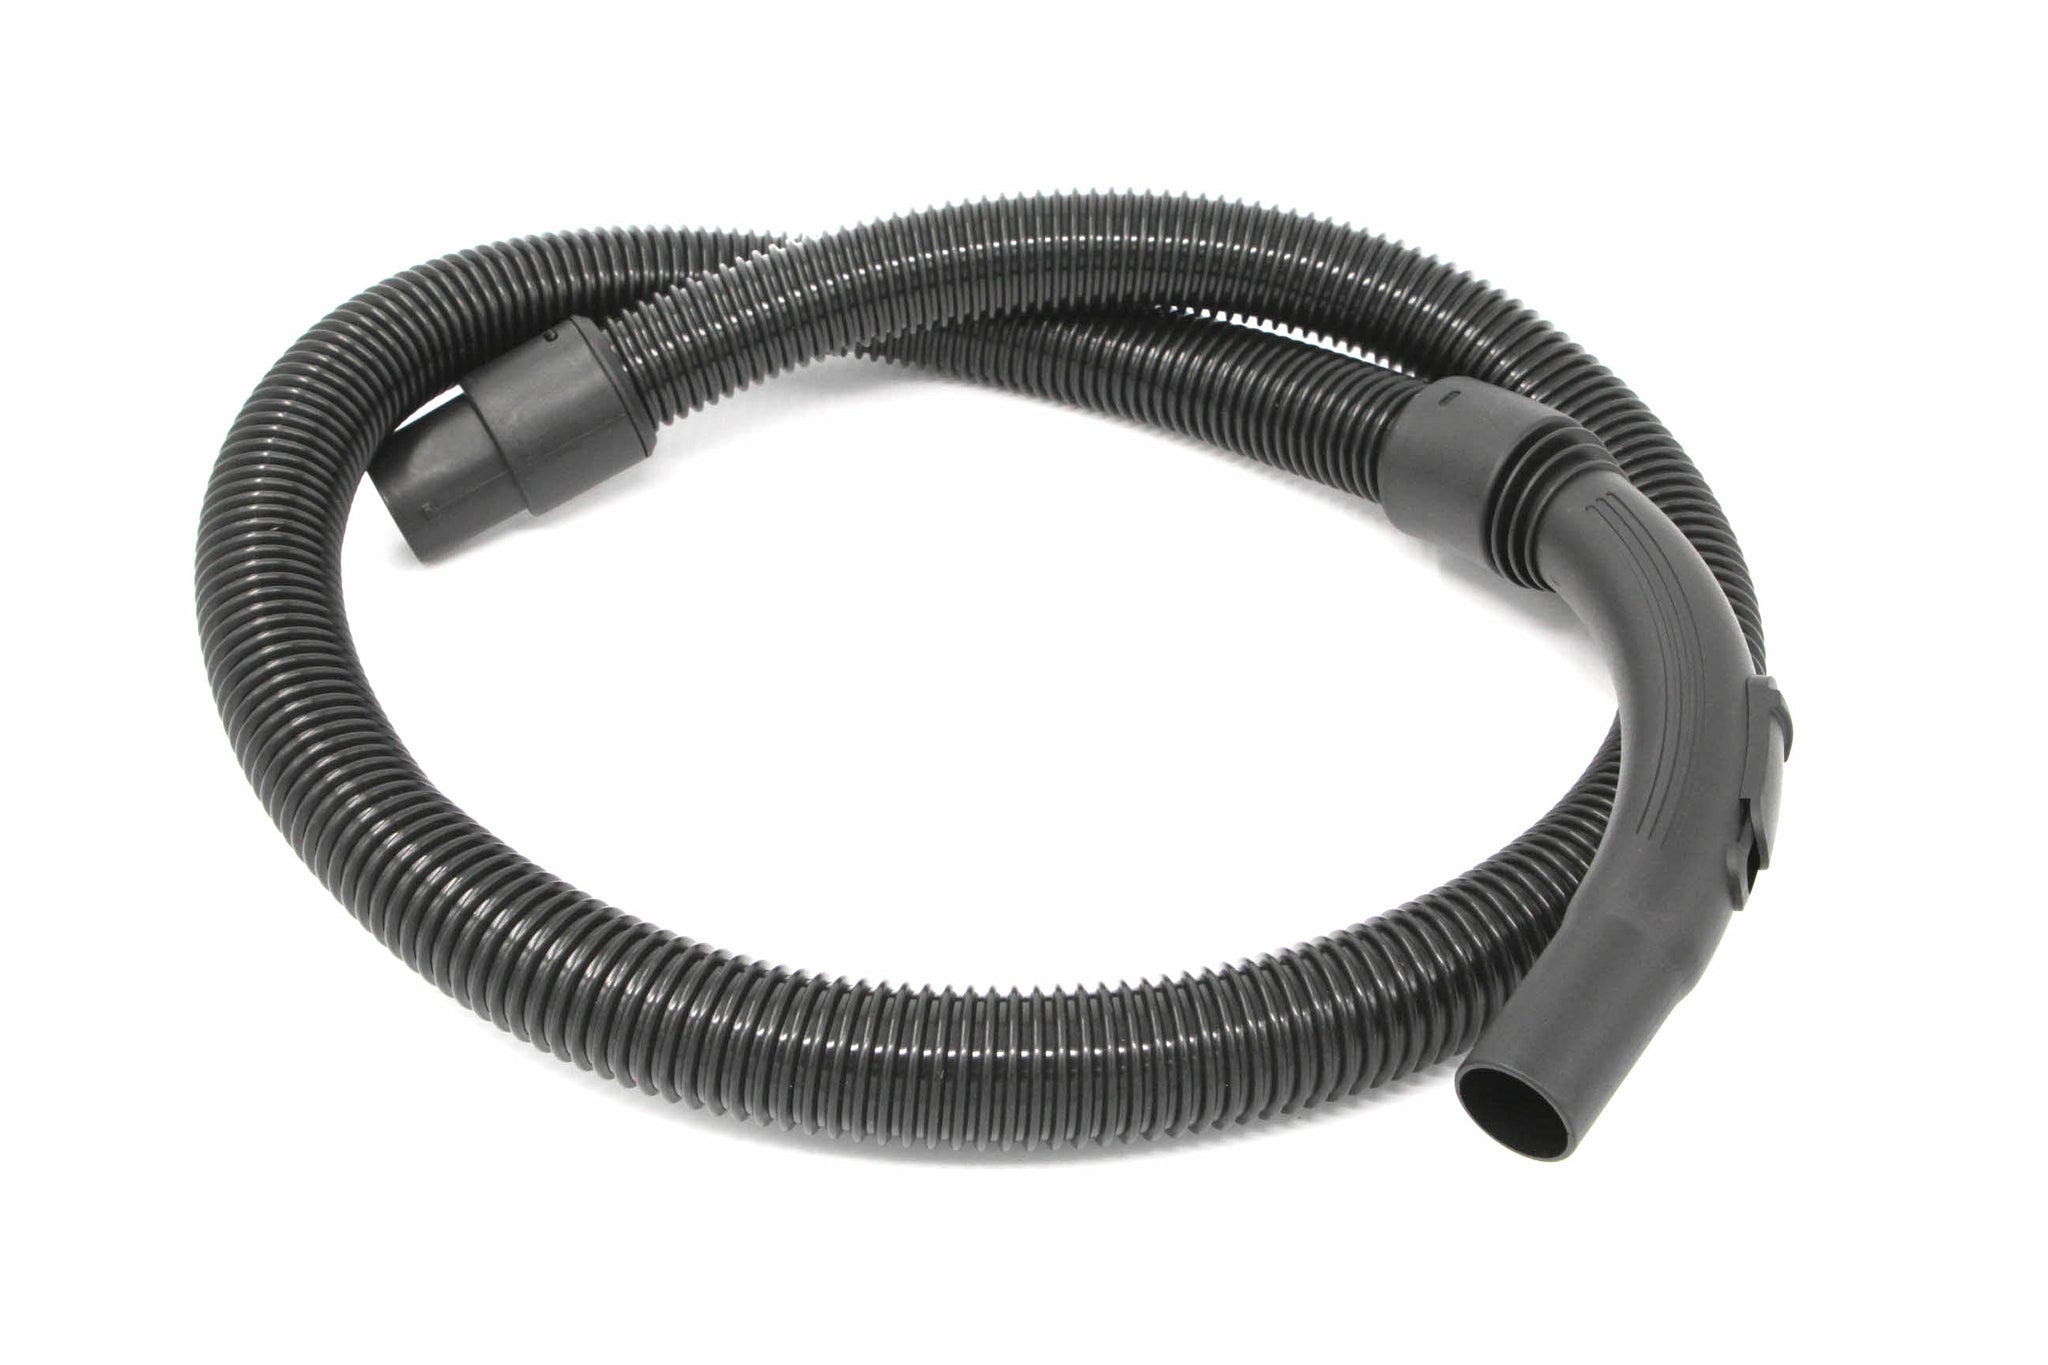 TYL-EC815A15P Water Filtration Vacuum Cleaner Flexible Hose